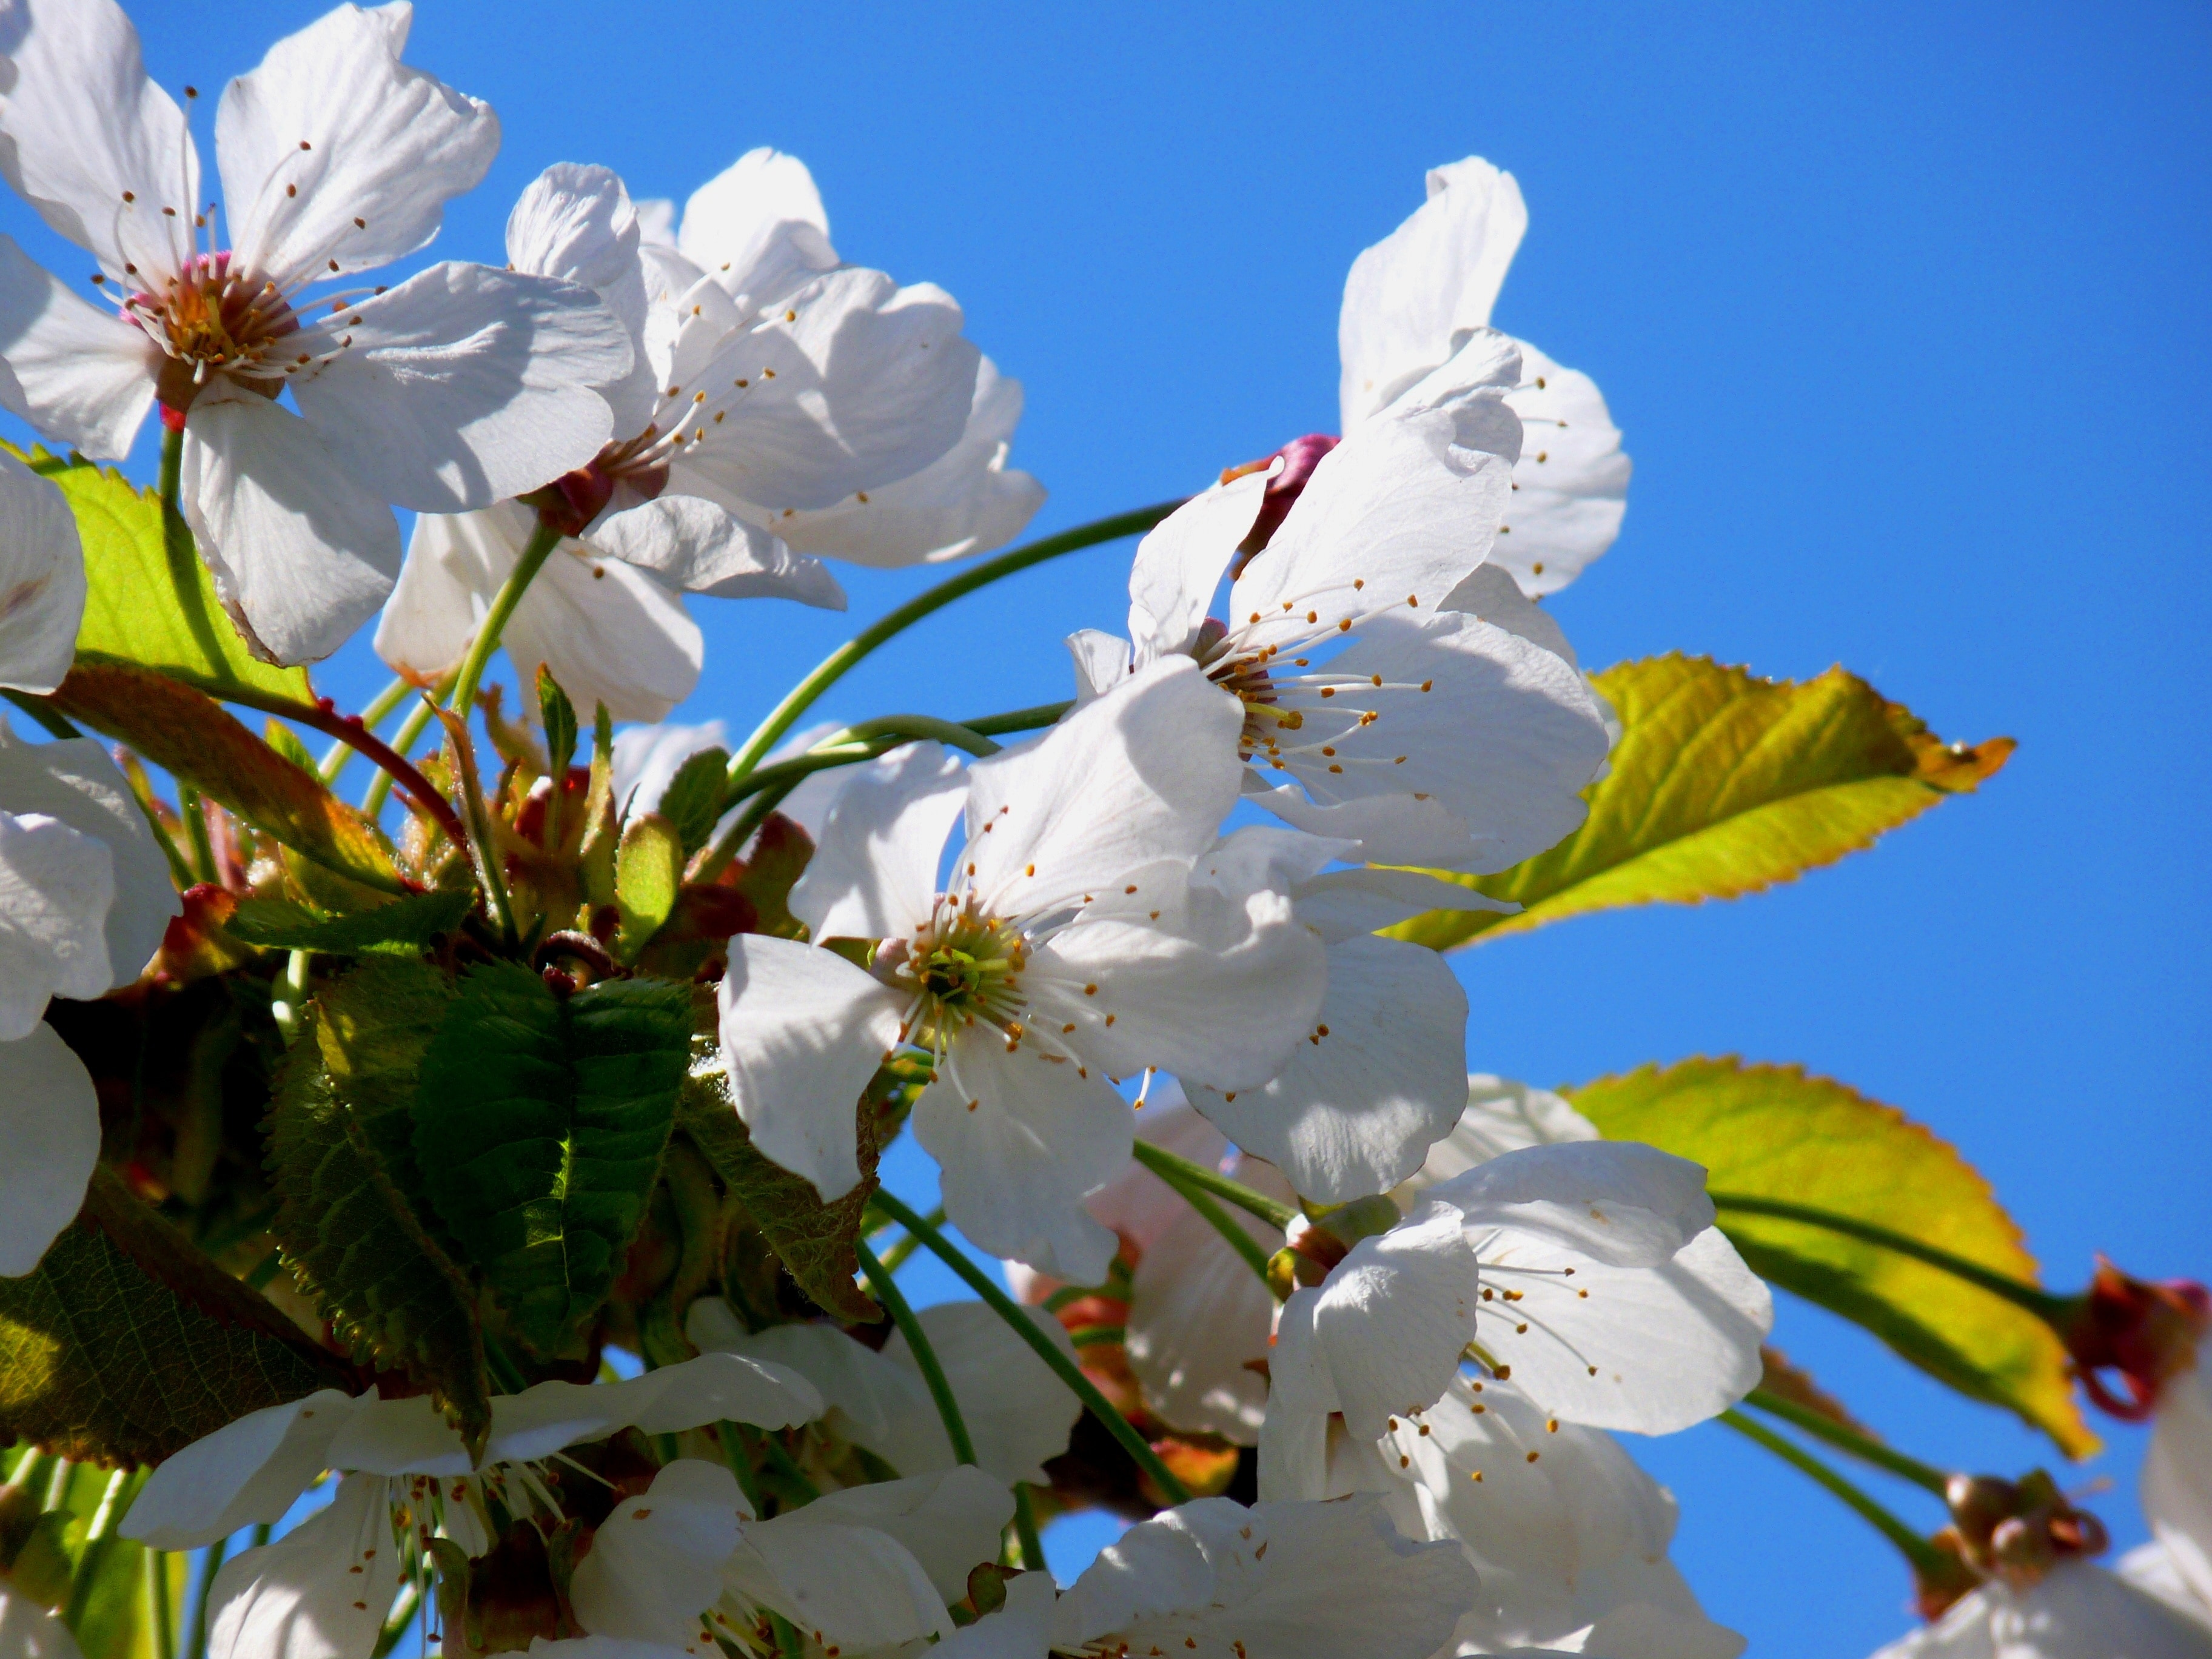 shallow focus photography of white flowers under blue sky during daytime